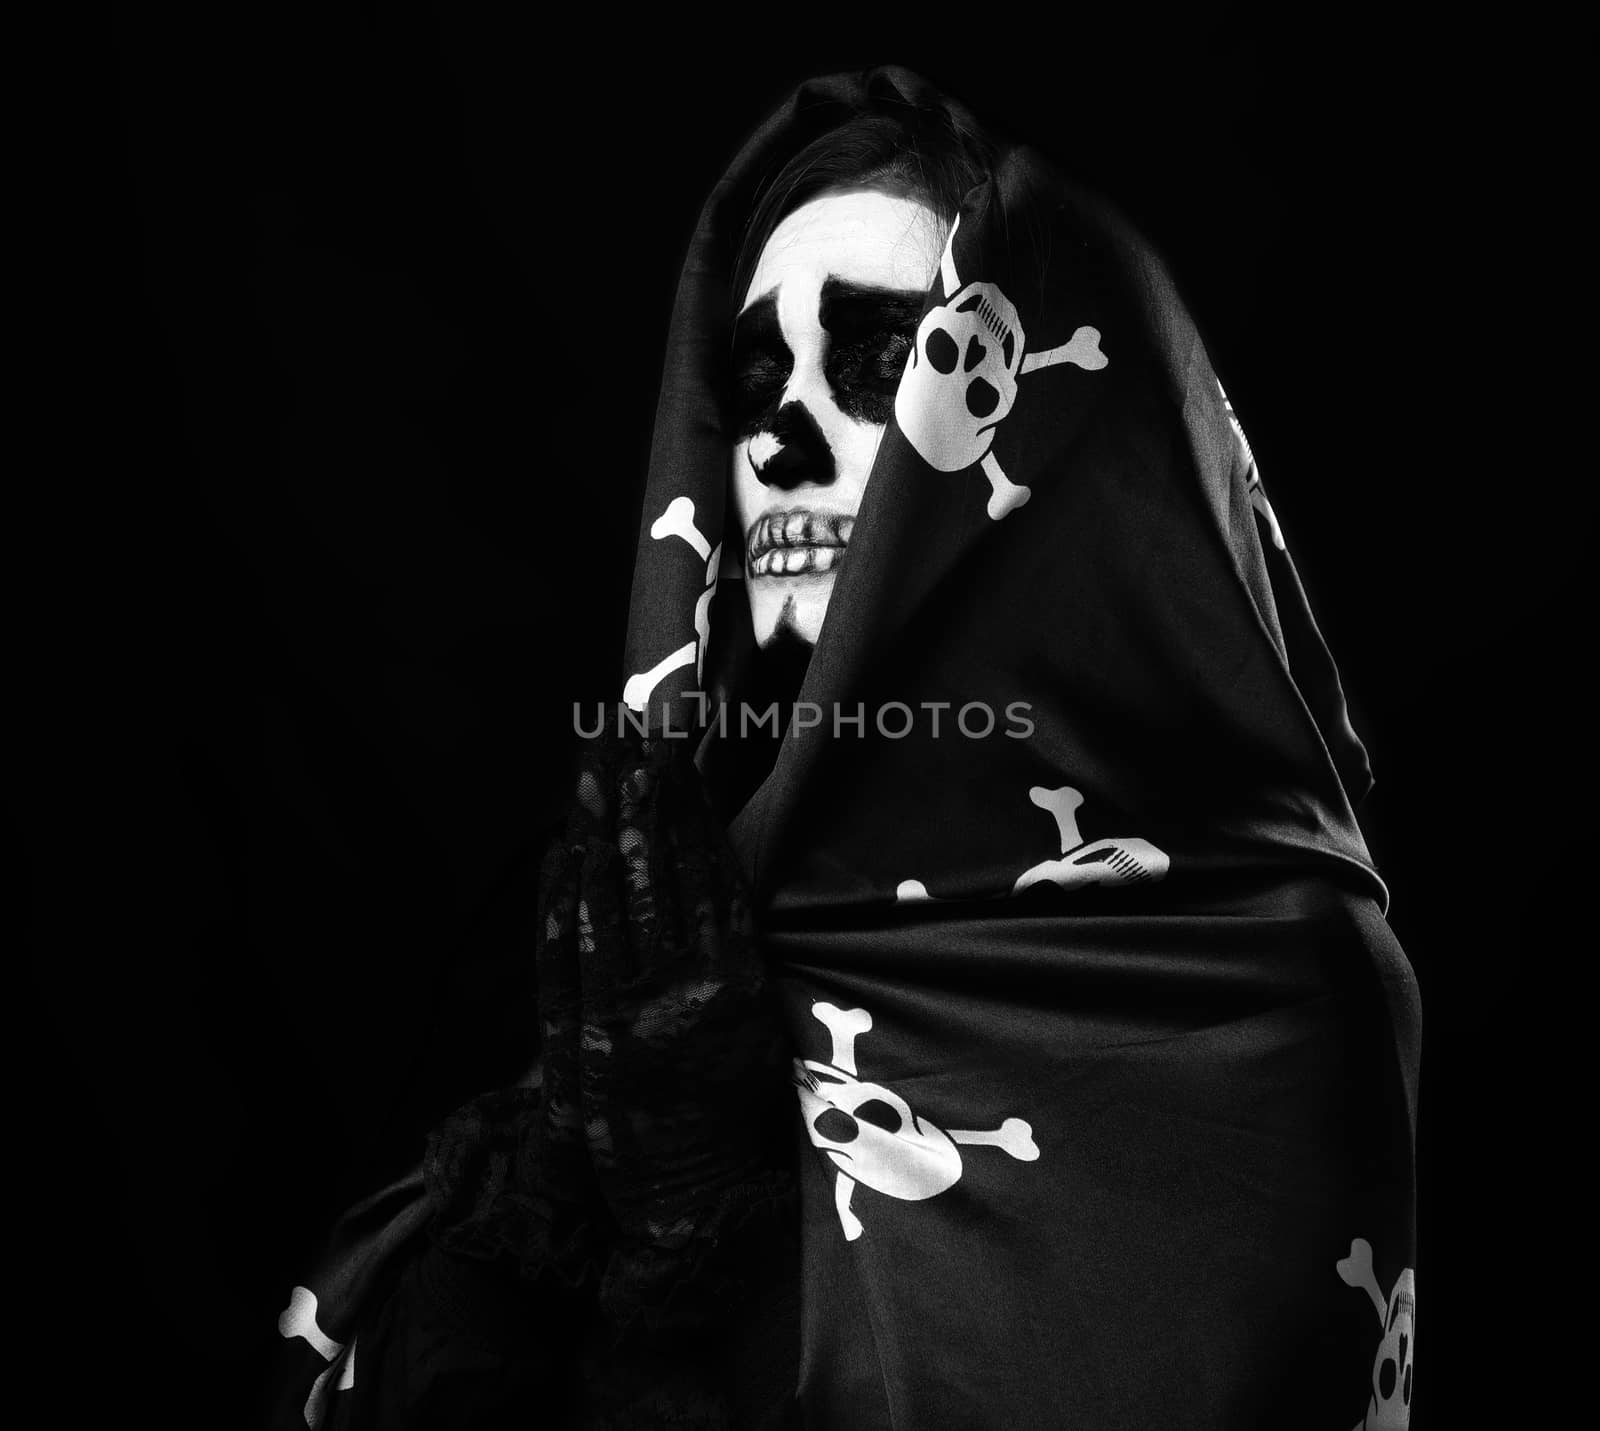 woman with skeleton make-up stands in prayer pose, wearing black by ndanko